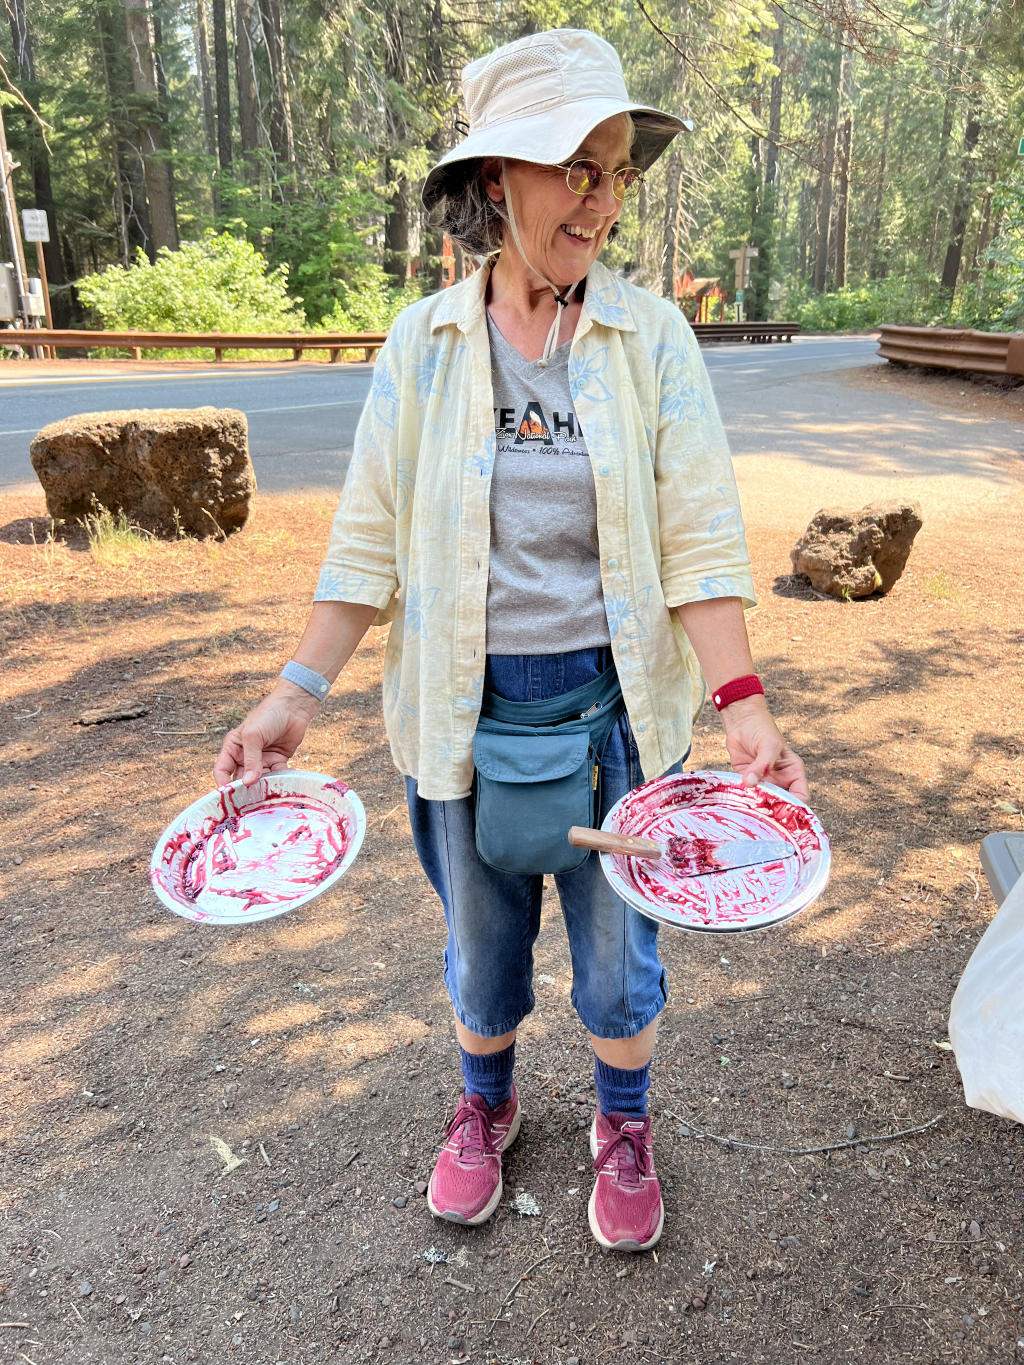  Before heading to the Rogue River Gorge, we stopped off at Beckie’s Cafe and polished off 4 pies. Here’s Barb showing the result. 